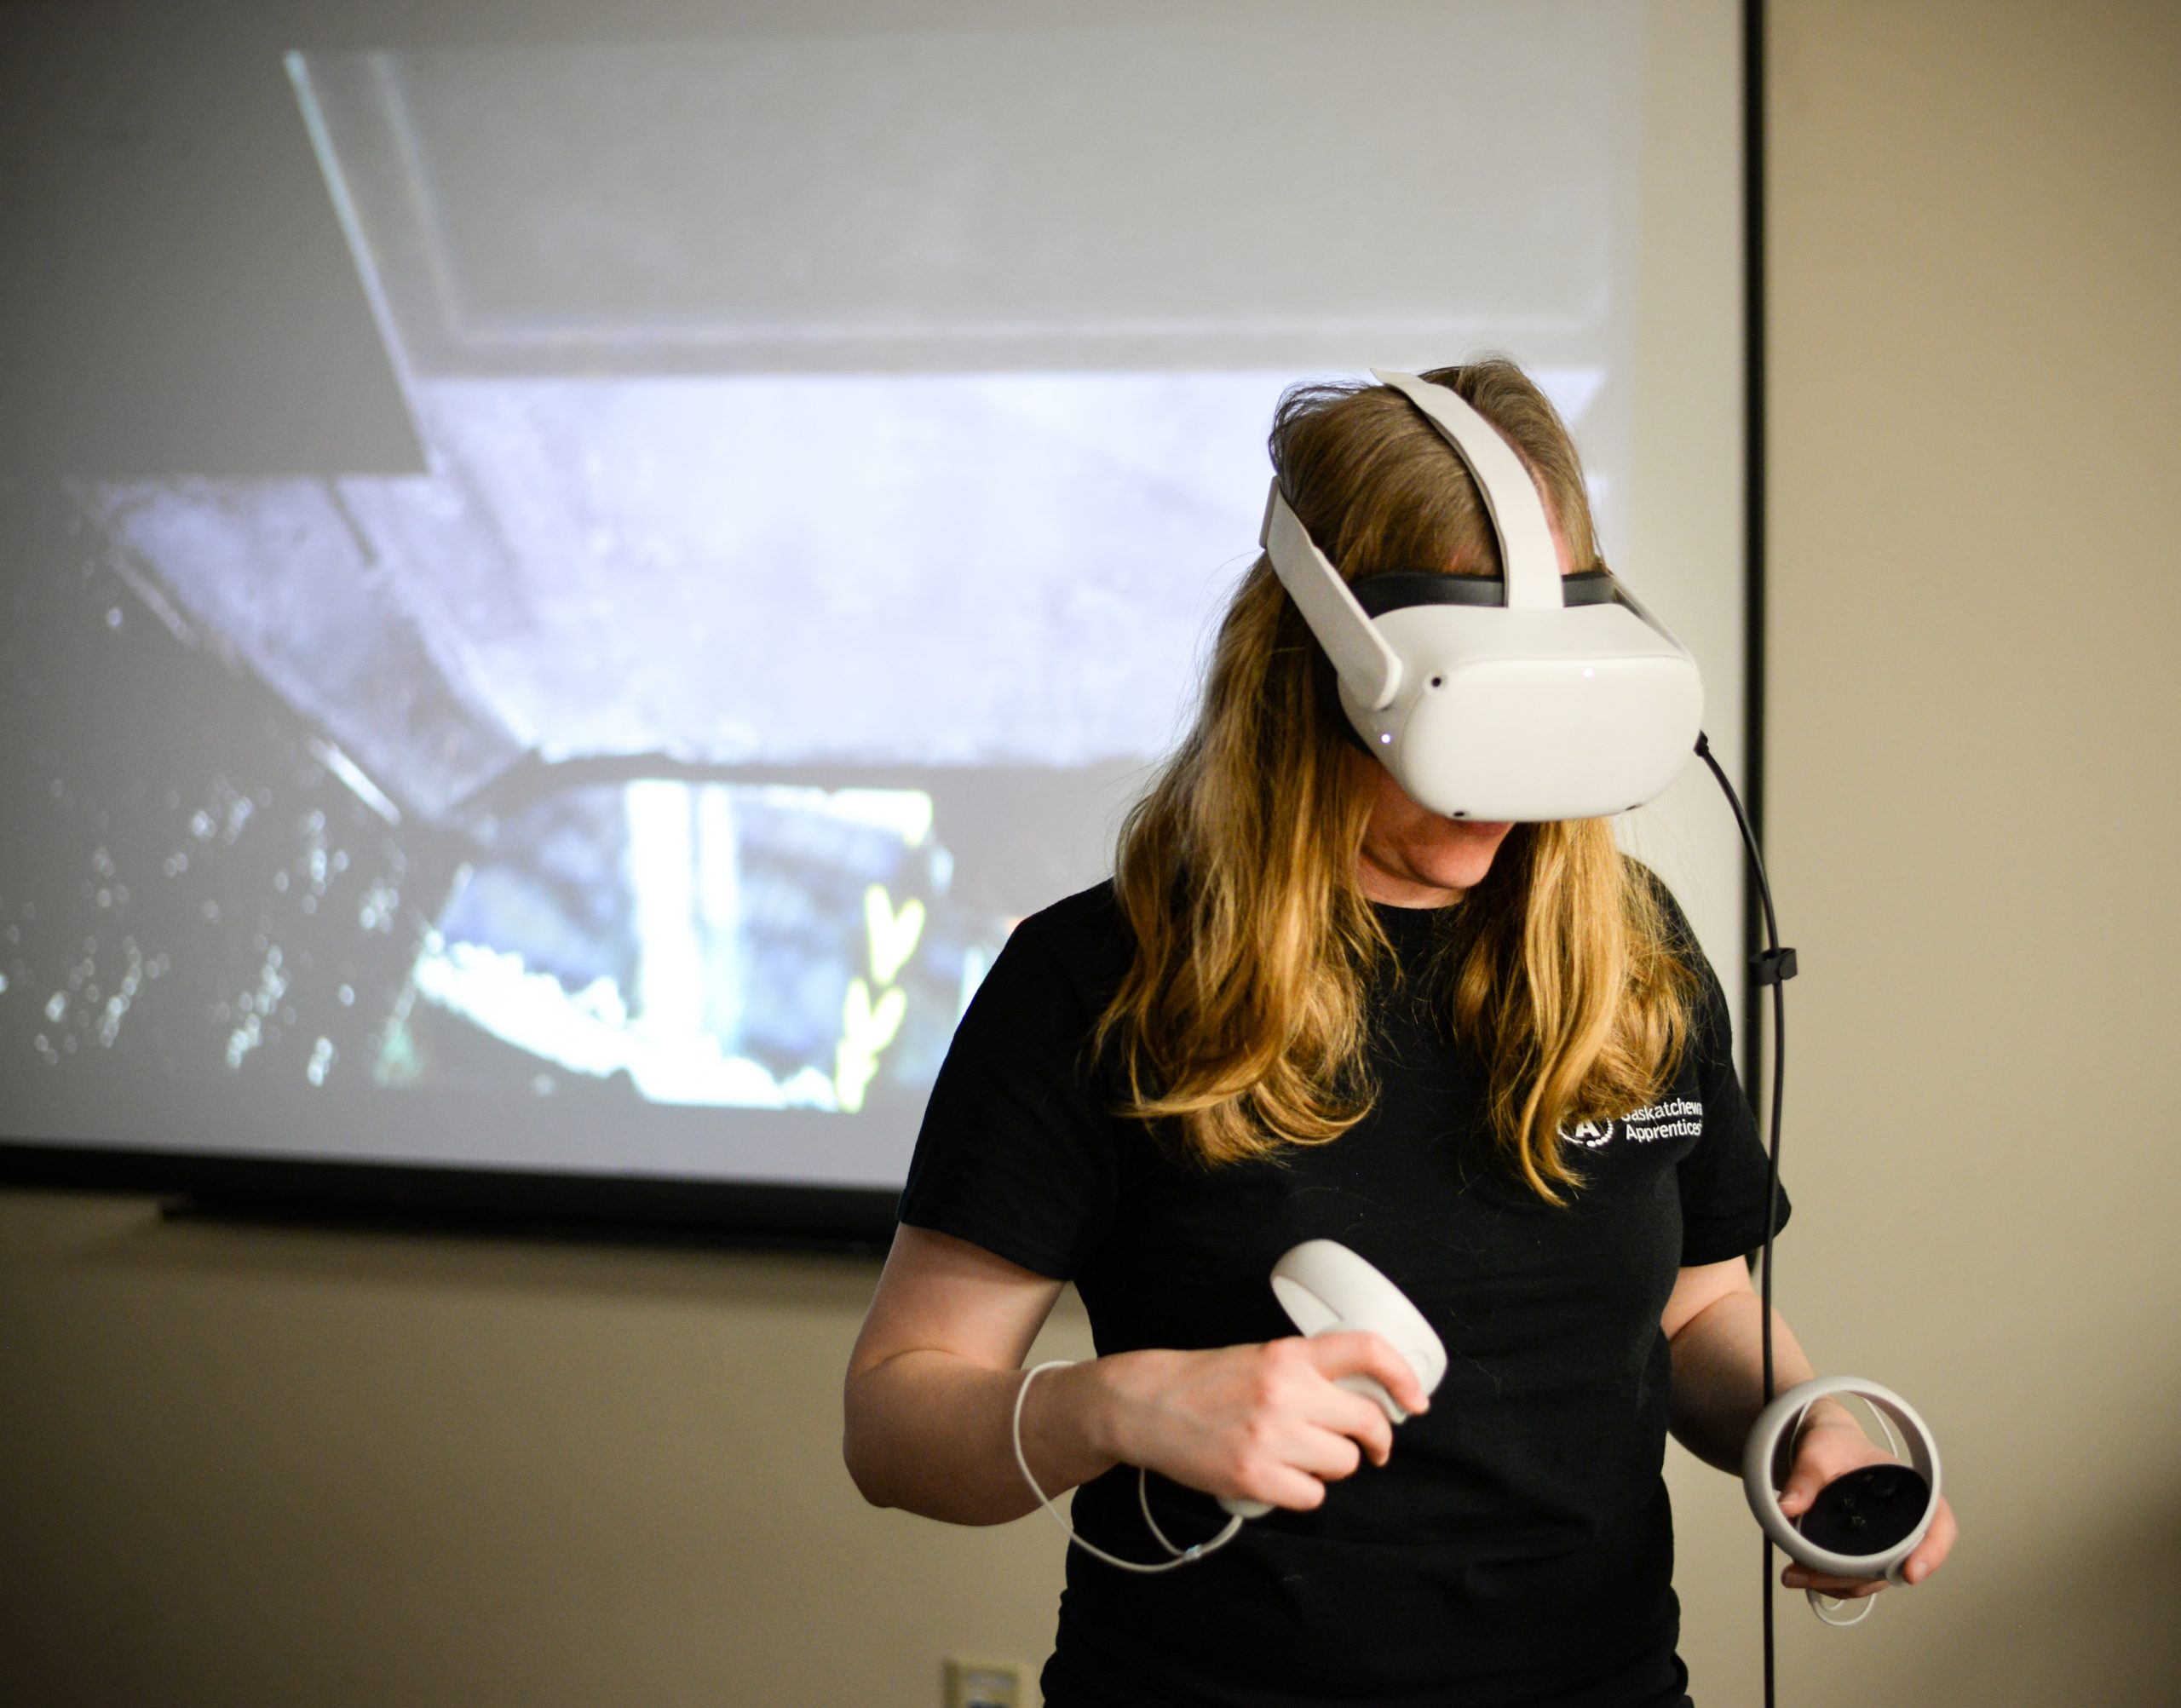 Woman wearing VR headset and holding VR controllers